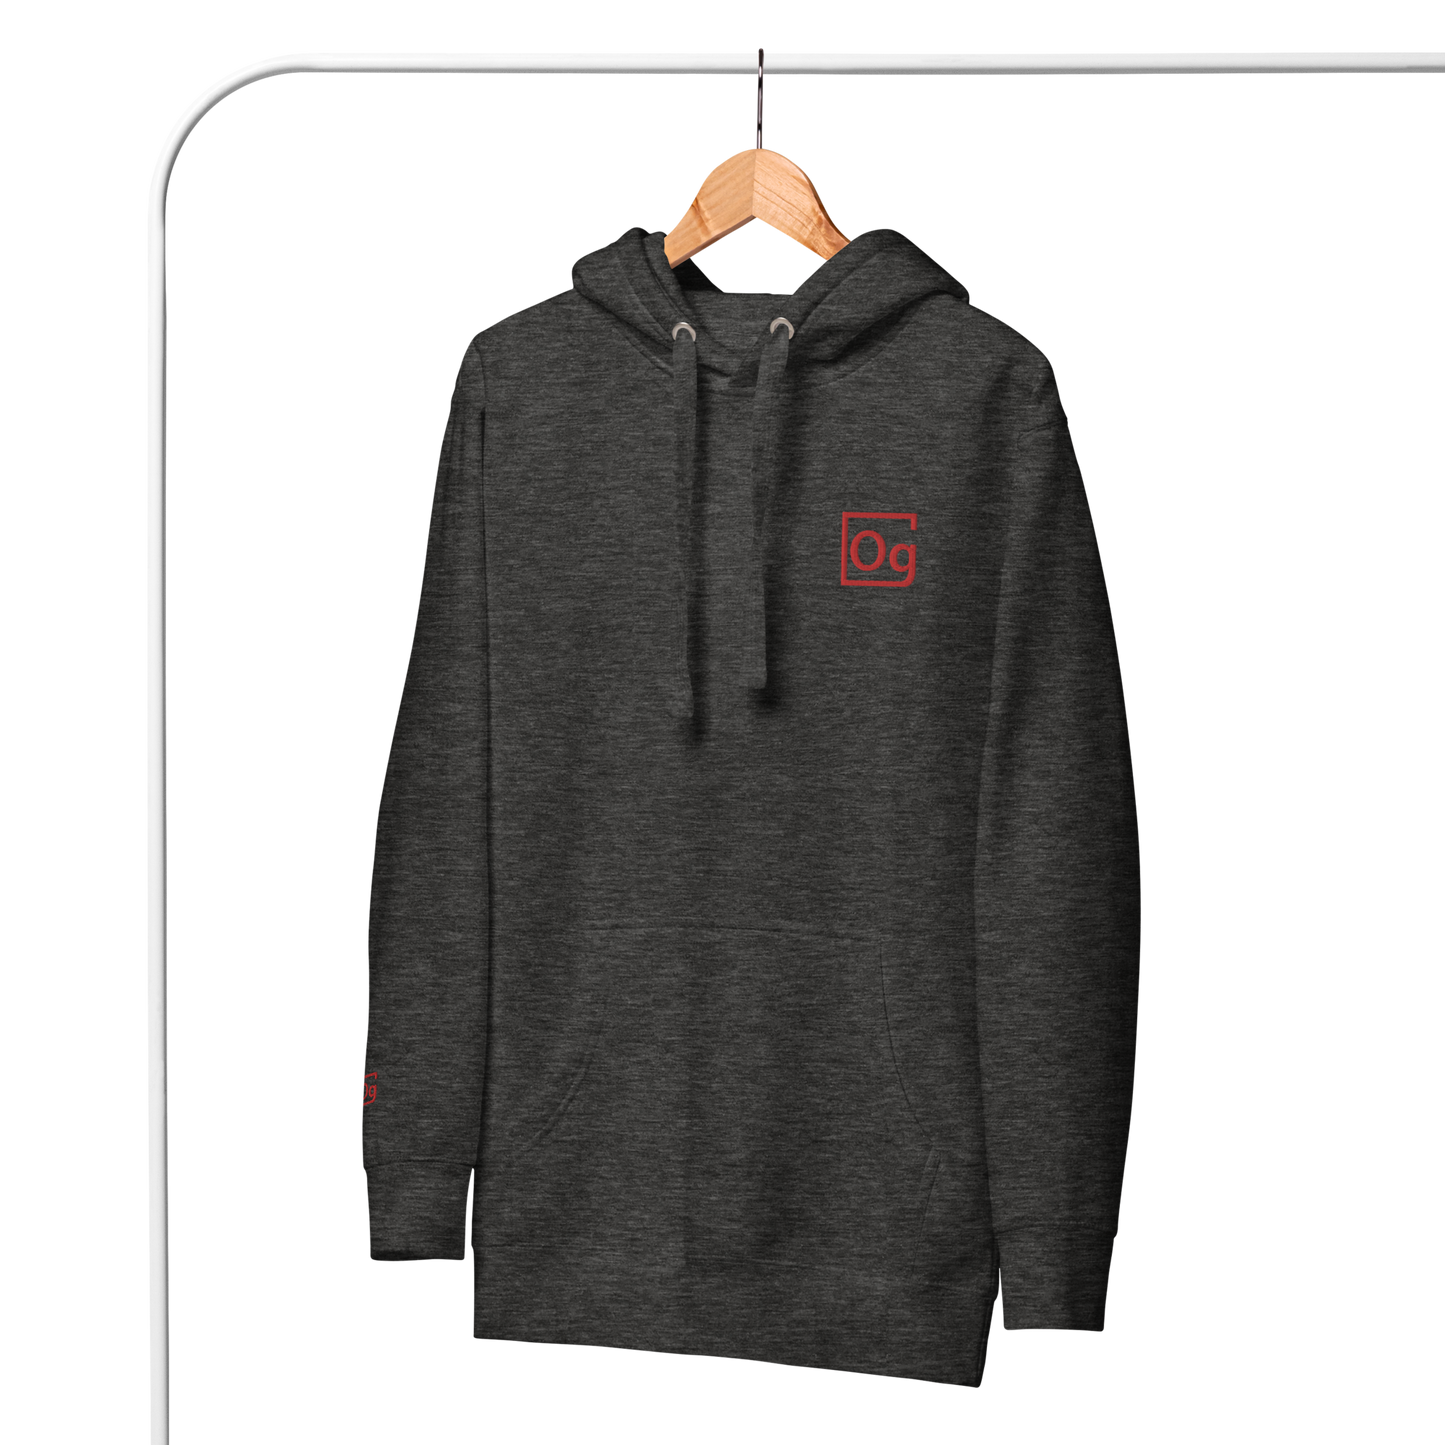 The Element Embroidered Hoodie